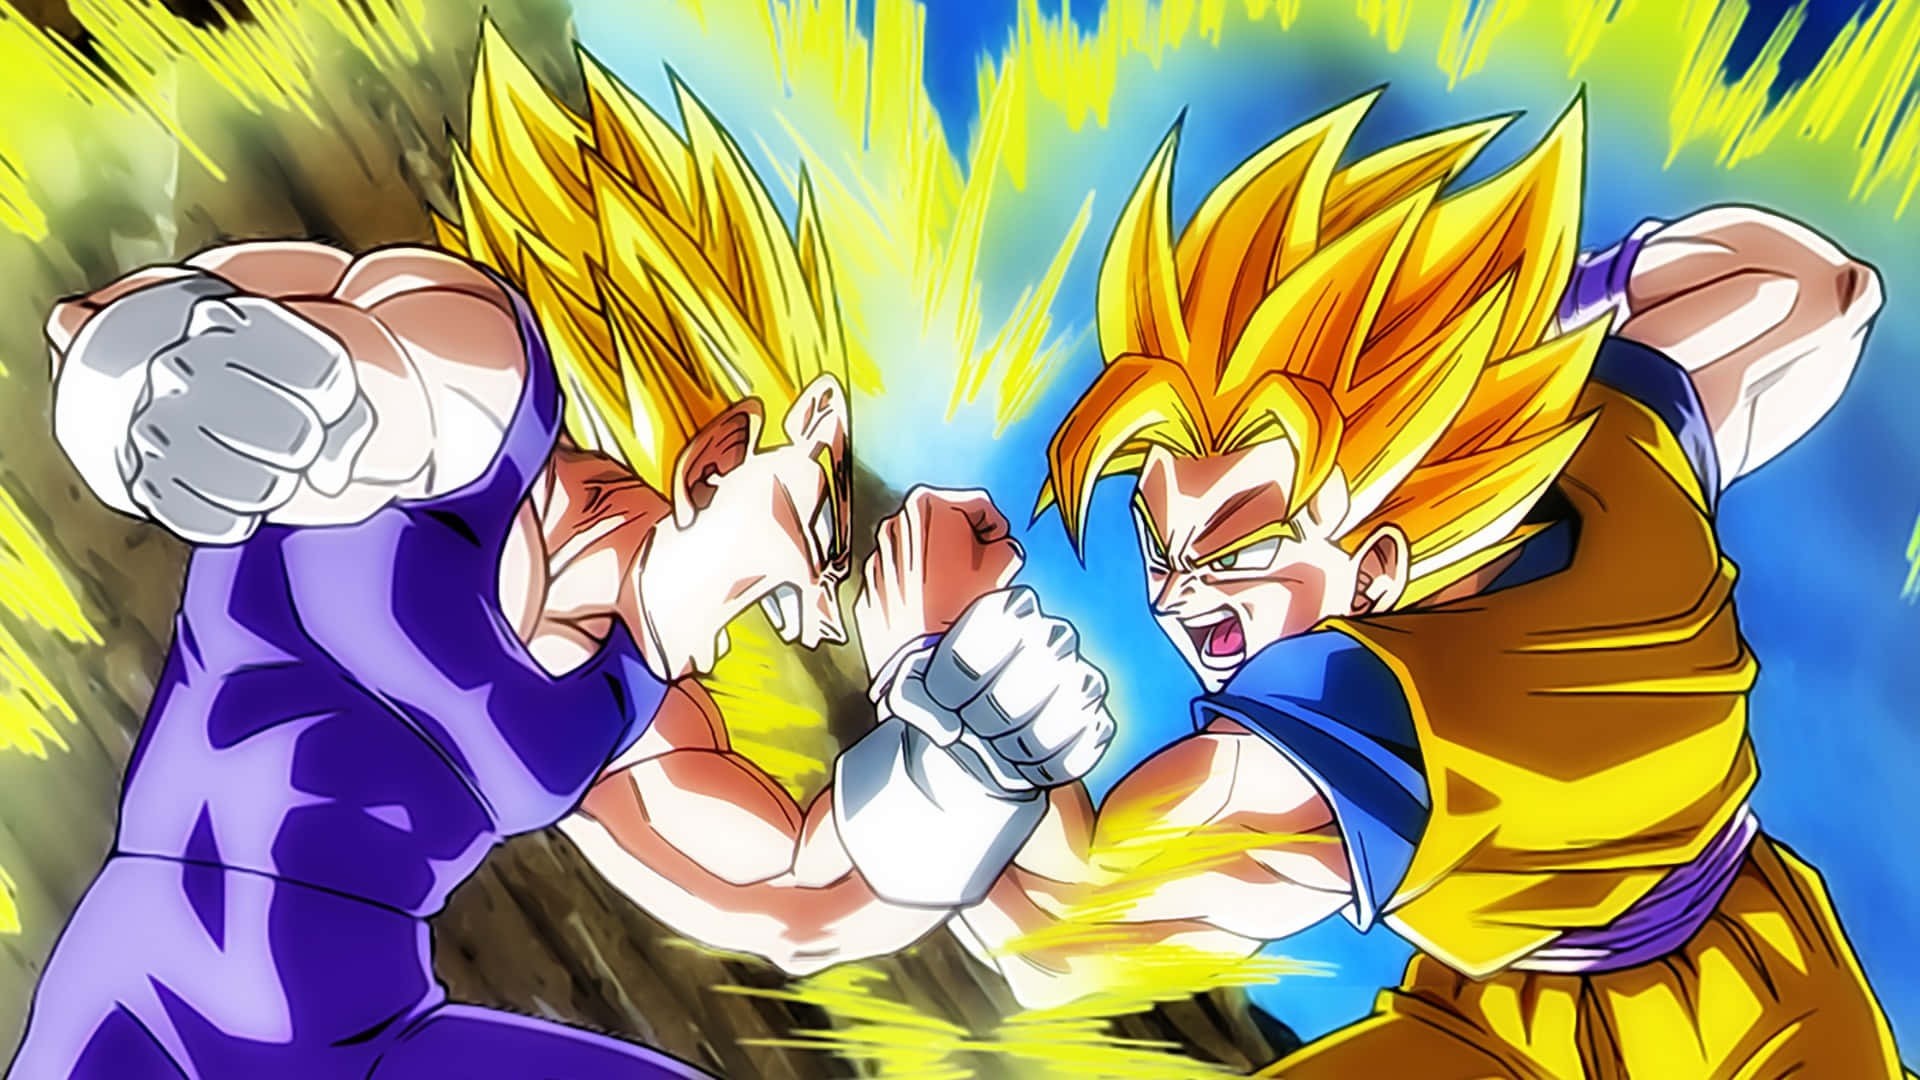 In Dragonball Super: Broly (2018), Vegeta and Goku's positions when they  each first face Broly is an homage to their first meeting against each  other. : r/MovieDetails